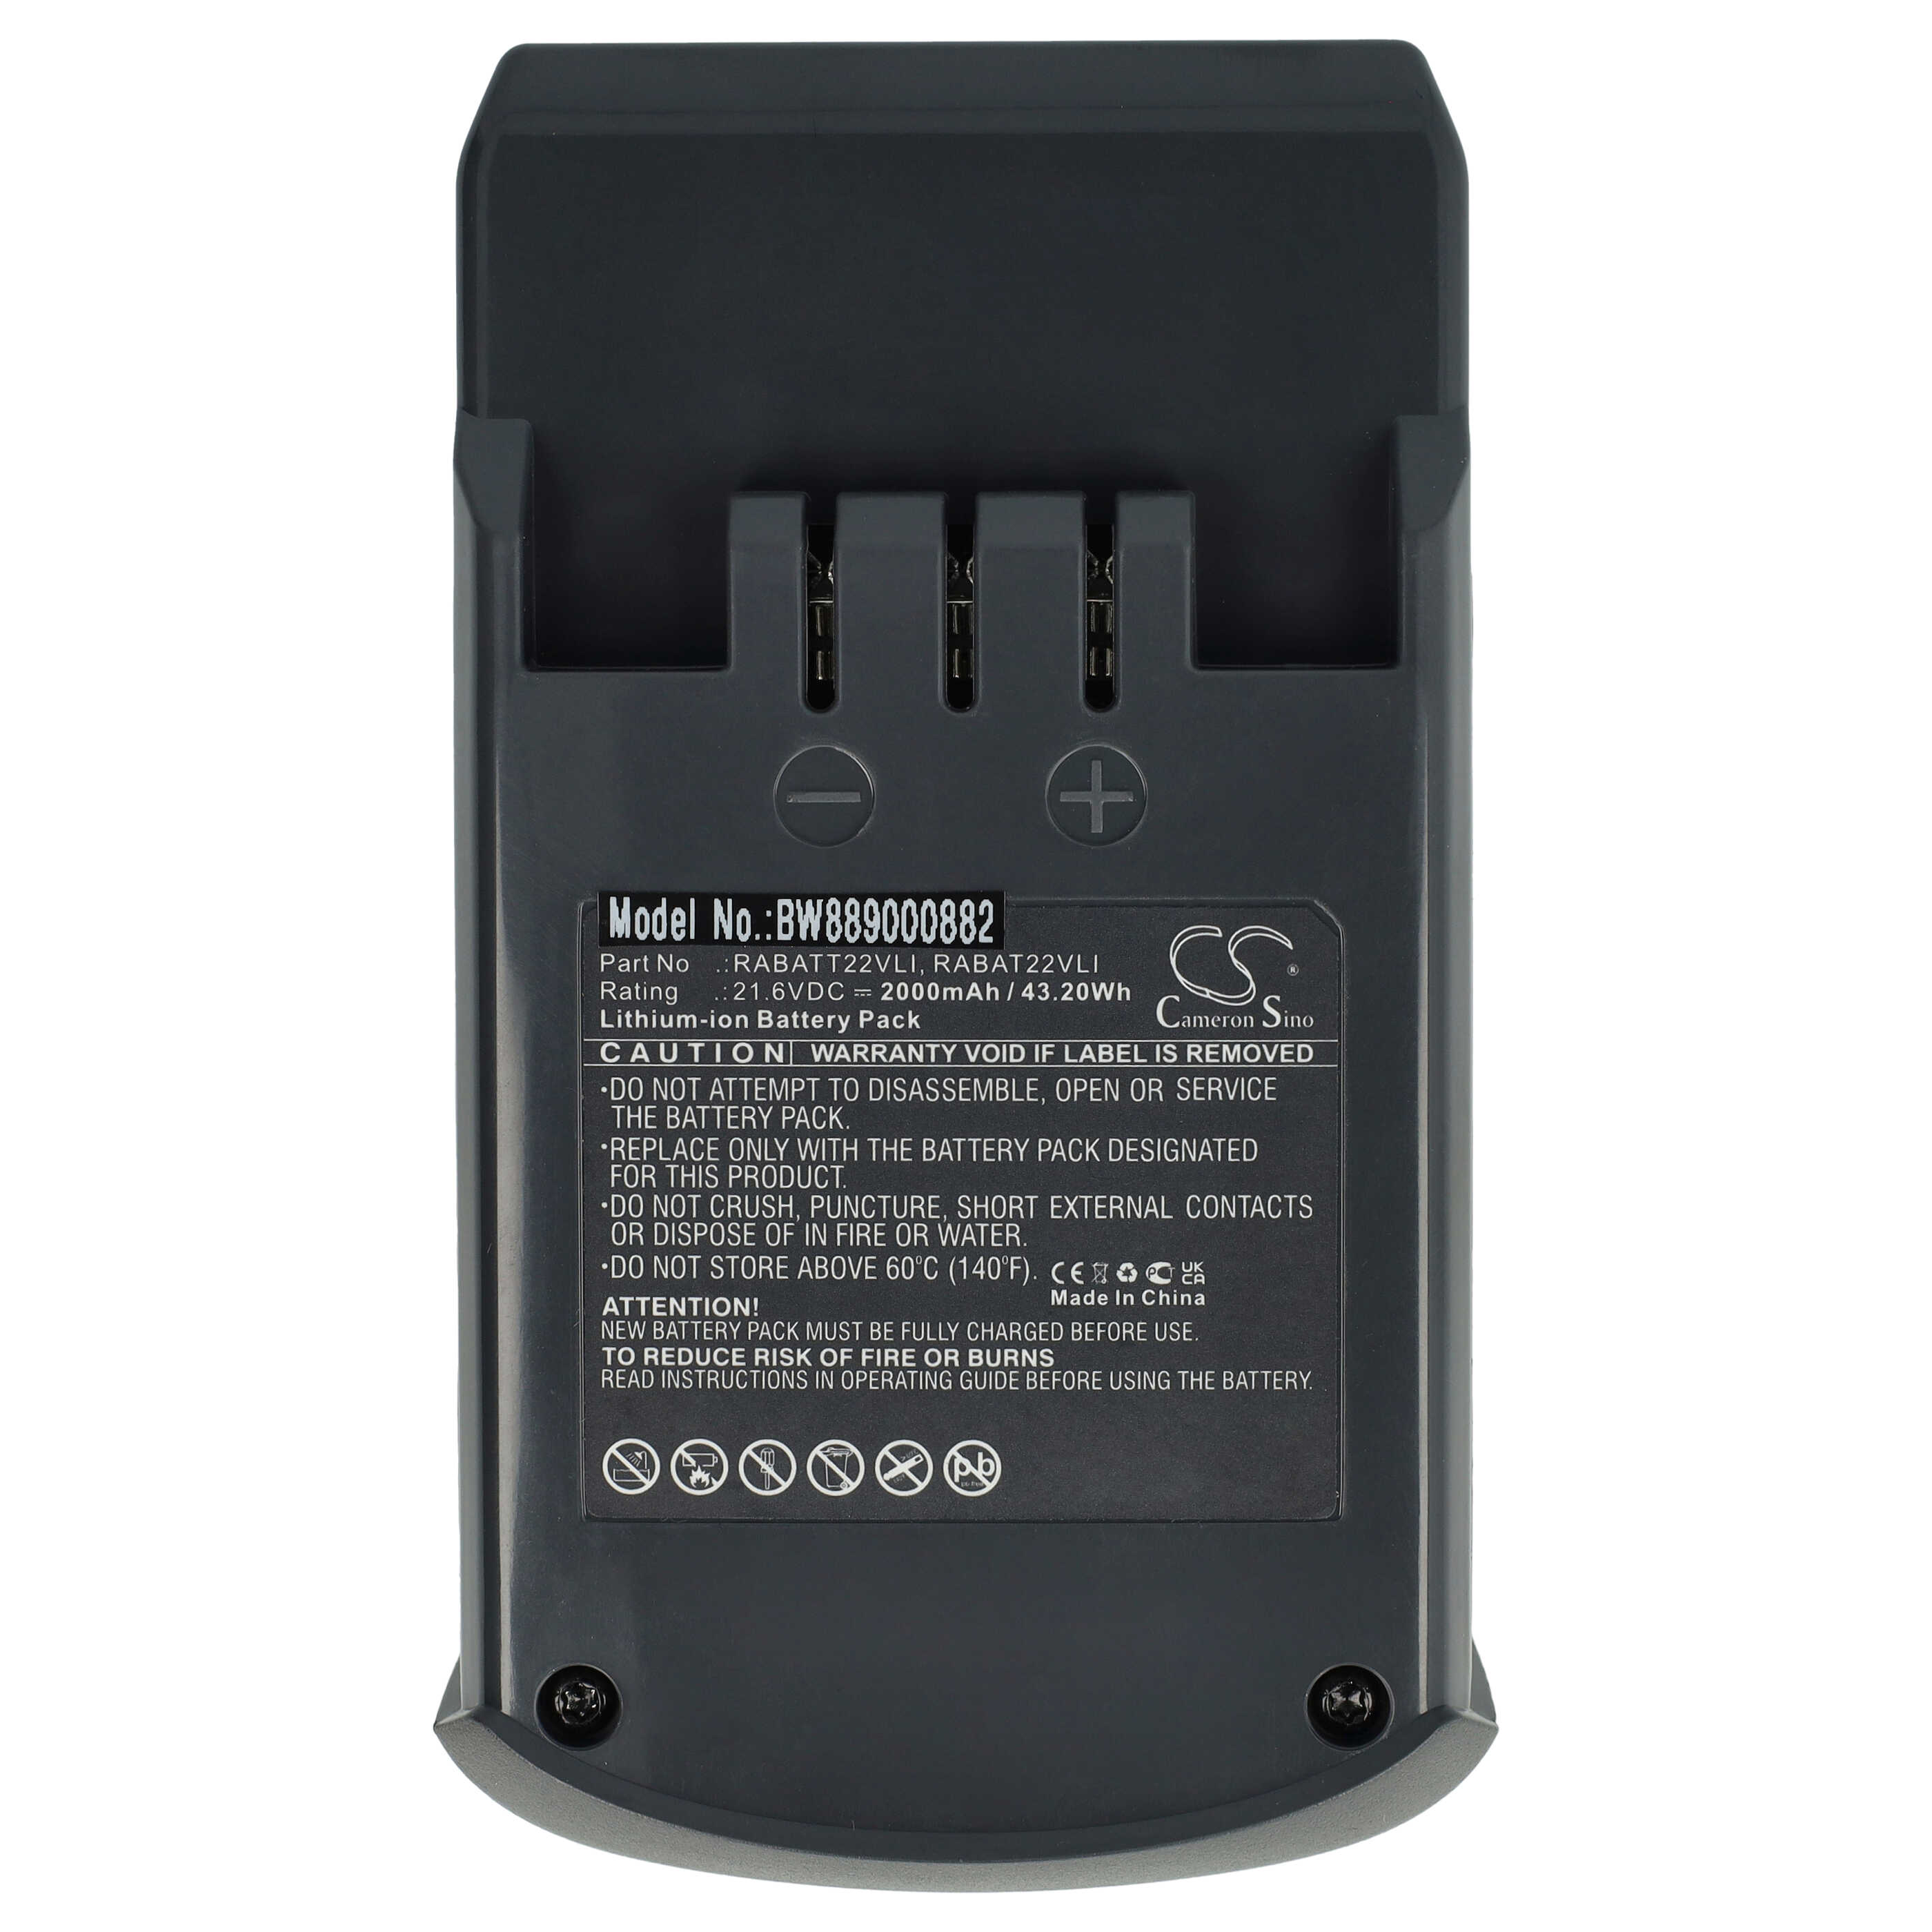 Replacement Battery for Hoover Rhapsody - 2000mAh, 21.6V, Li-Ion